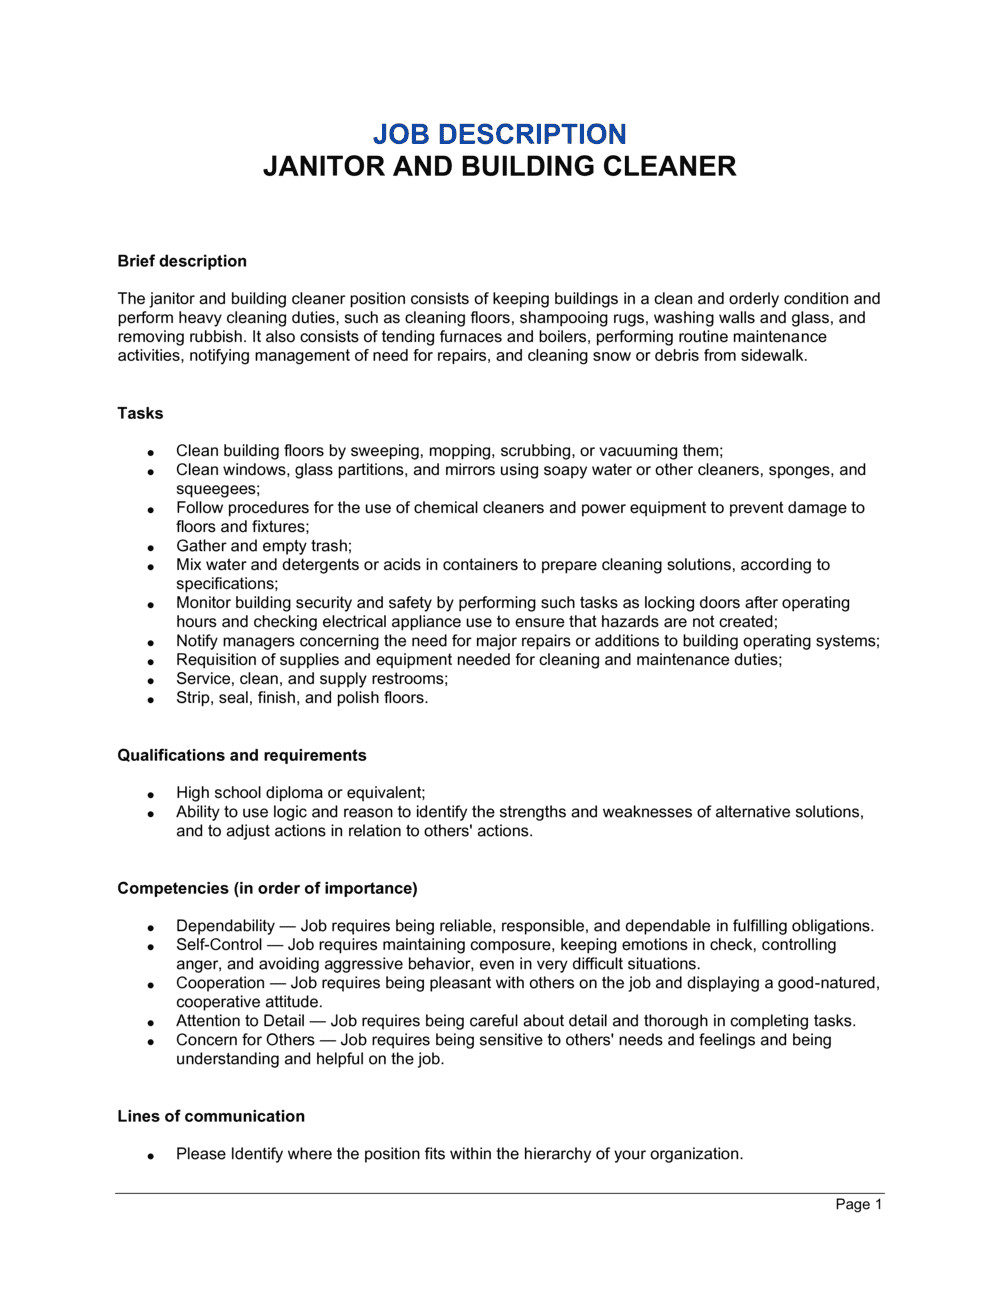 Janitor and Building Cleaner Job Description Template  by  Inside Building Maintenance Job Description Template In Building Maintenance Job Description Template